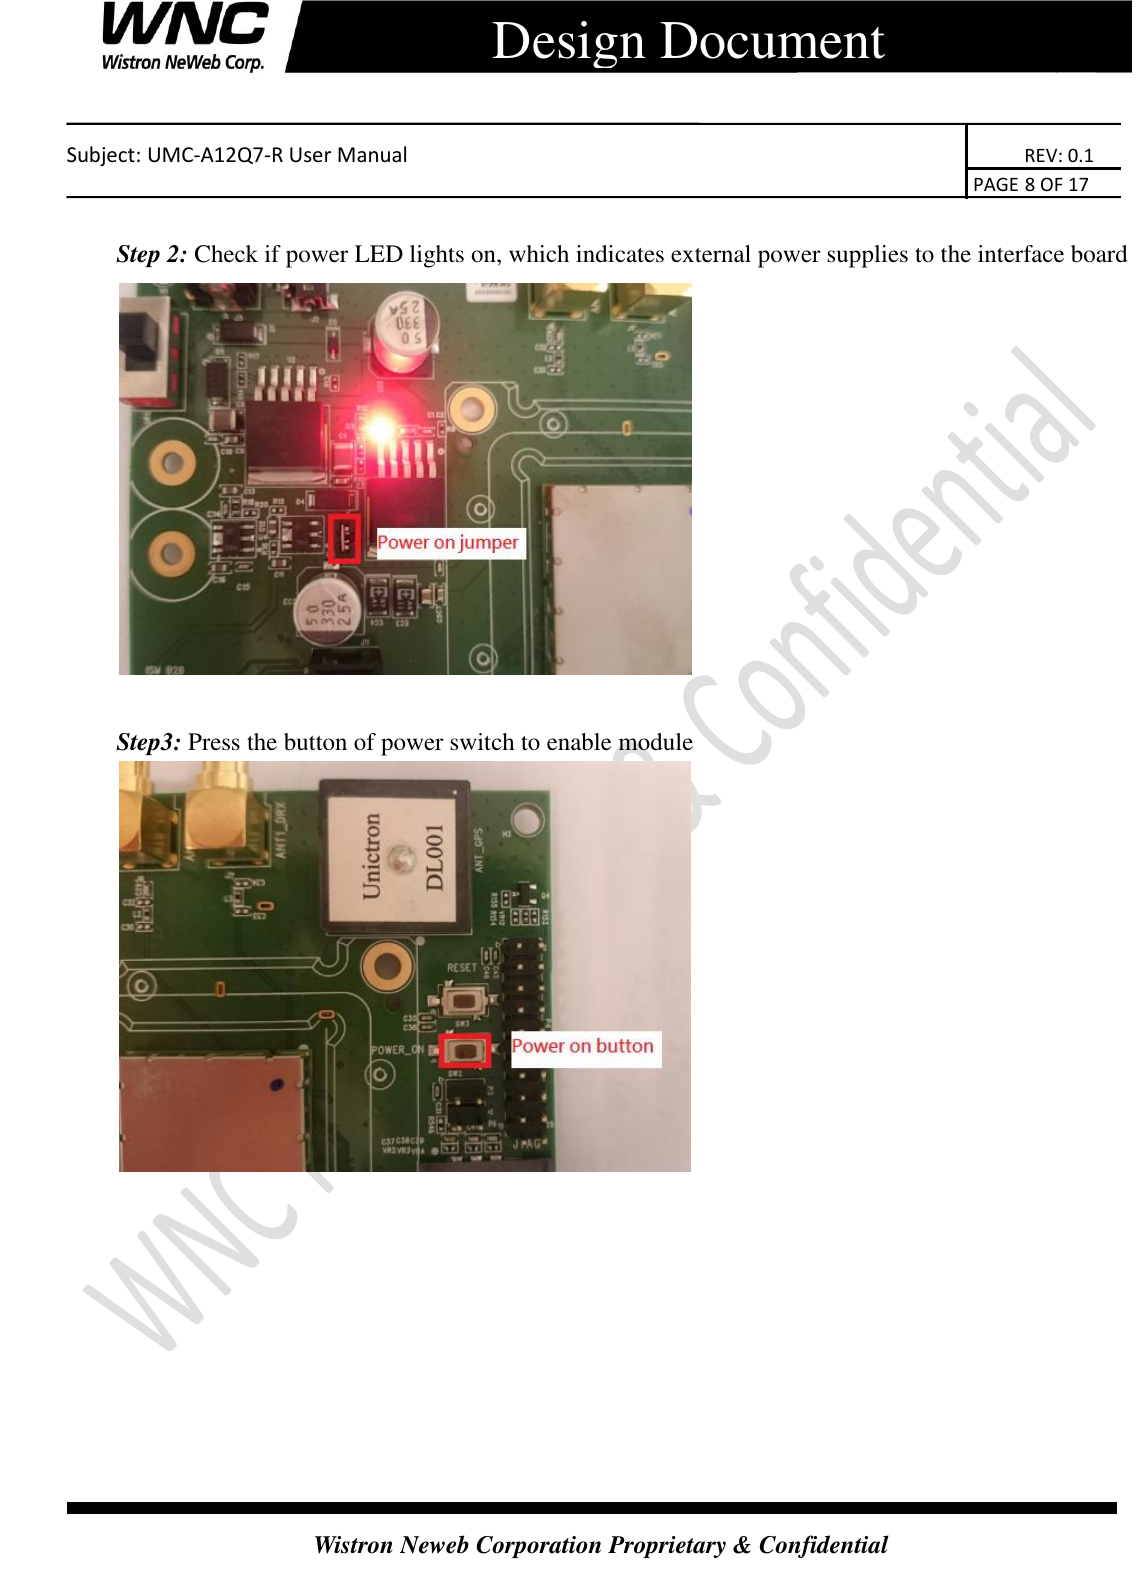    Subject: UMC-A12Q7-R User Manual                                                                      REV: 0.1                                                                                        PAGE 8 OF 17  Wistron Neweb Corporation Proprietary &amp; Confidential      Design Document  Step 2: Check if power LED lights on, which indicates external power supplies to the interface board   Step3: Press the button of power switch to enable module        